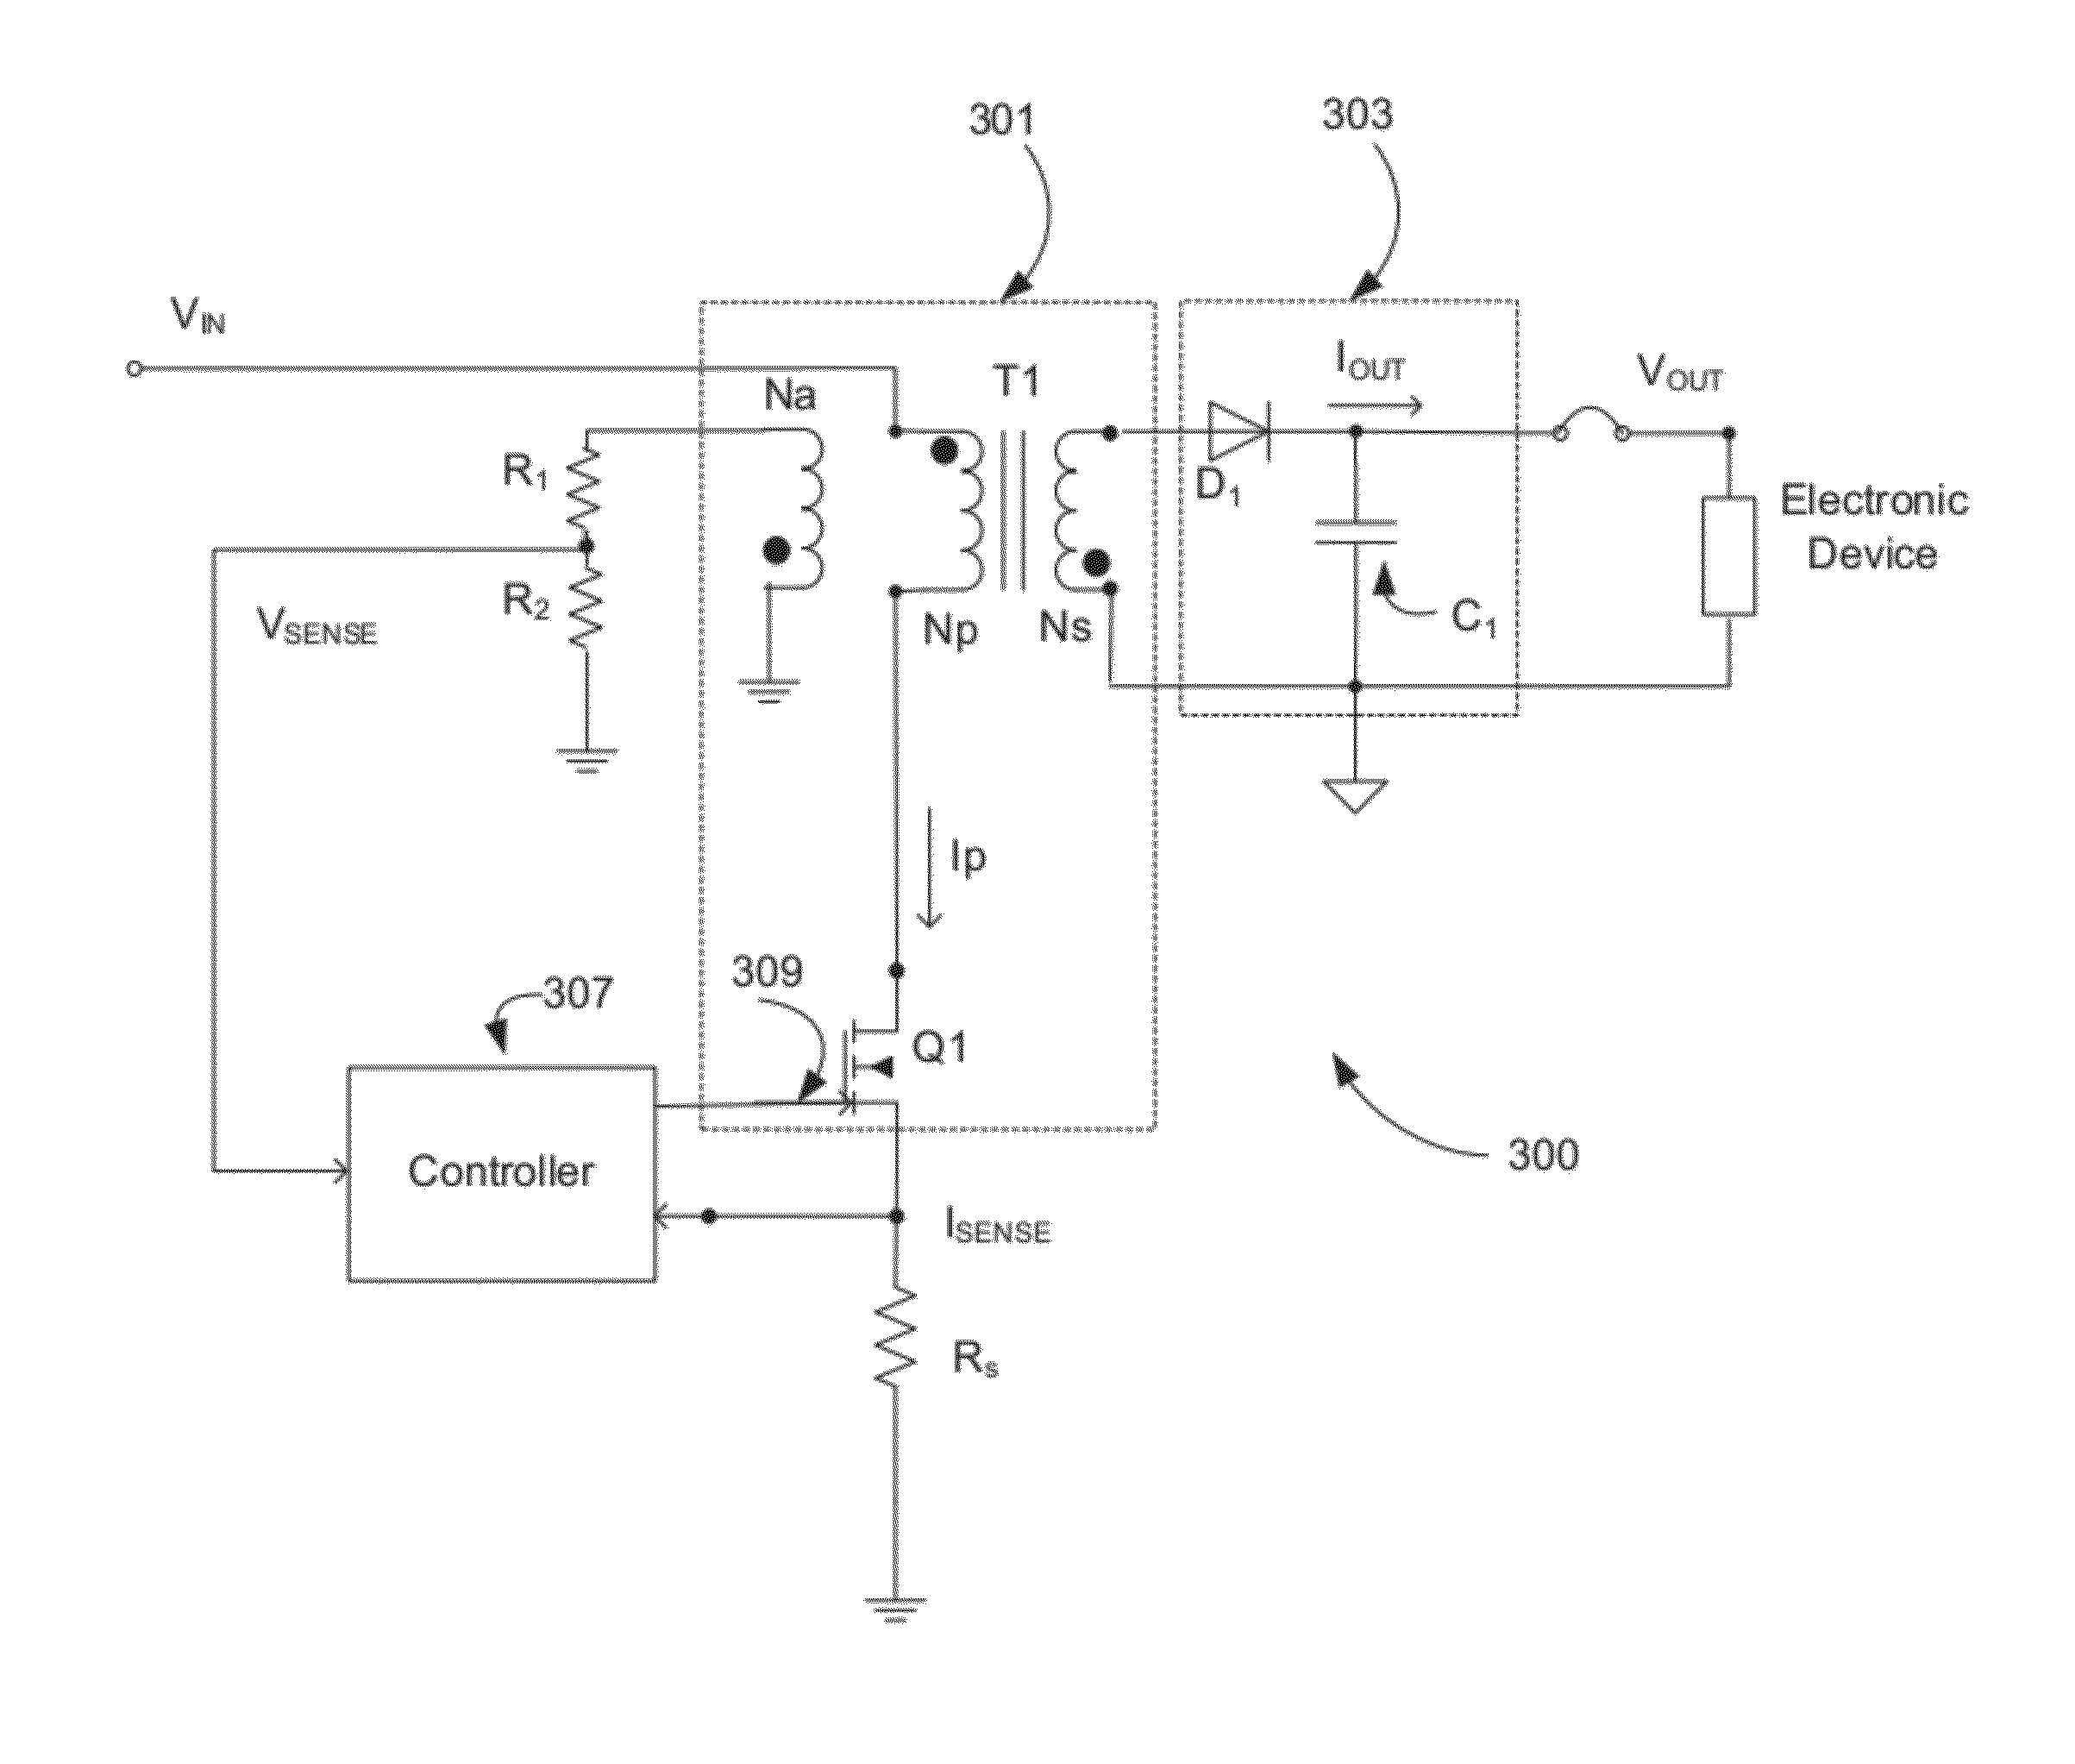 Switching Power Converter Having Optimal Dynamic Load Response with Ultra-Low No Load Power Consumption